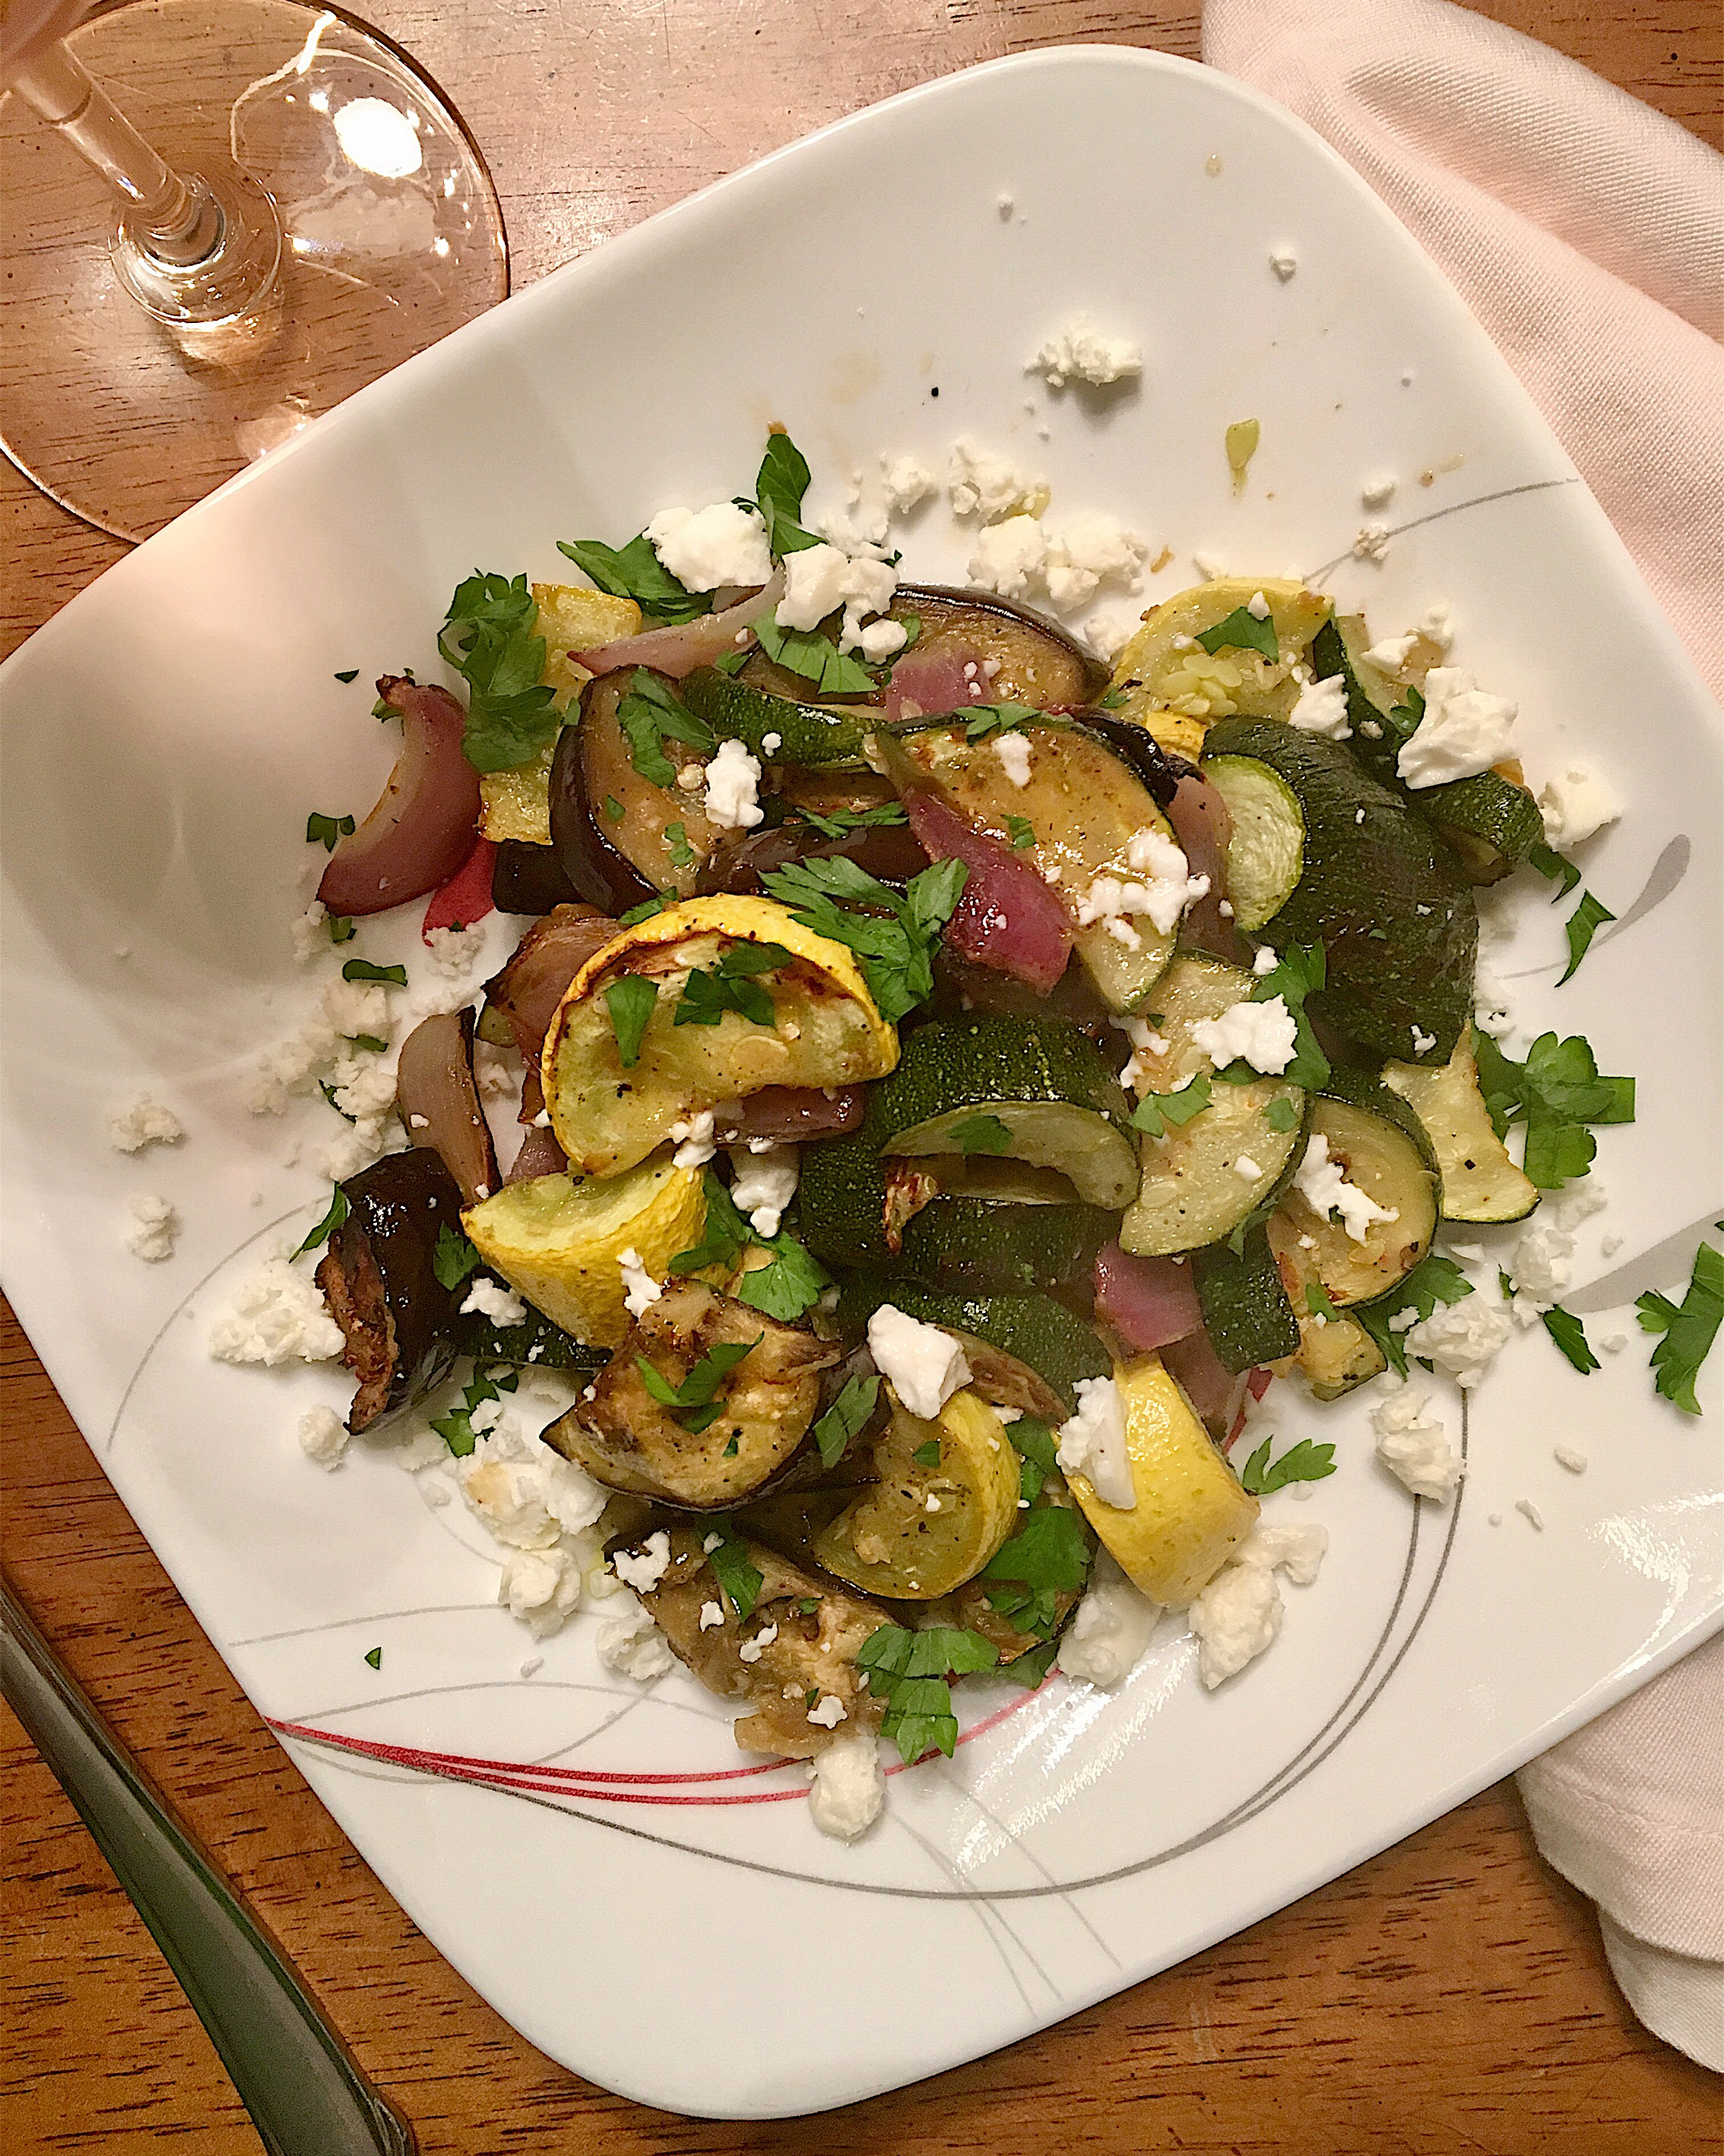 Roasted yellow squash, zucchini, eggplant, and red onion piled on a white plate, drizzled with red wine vinaigrette and sprinkled with feta cheese and parsley.